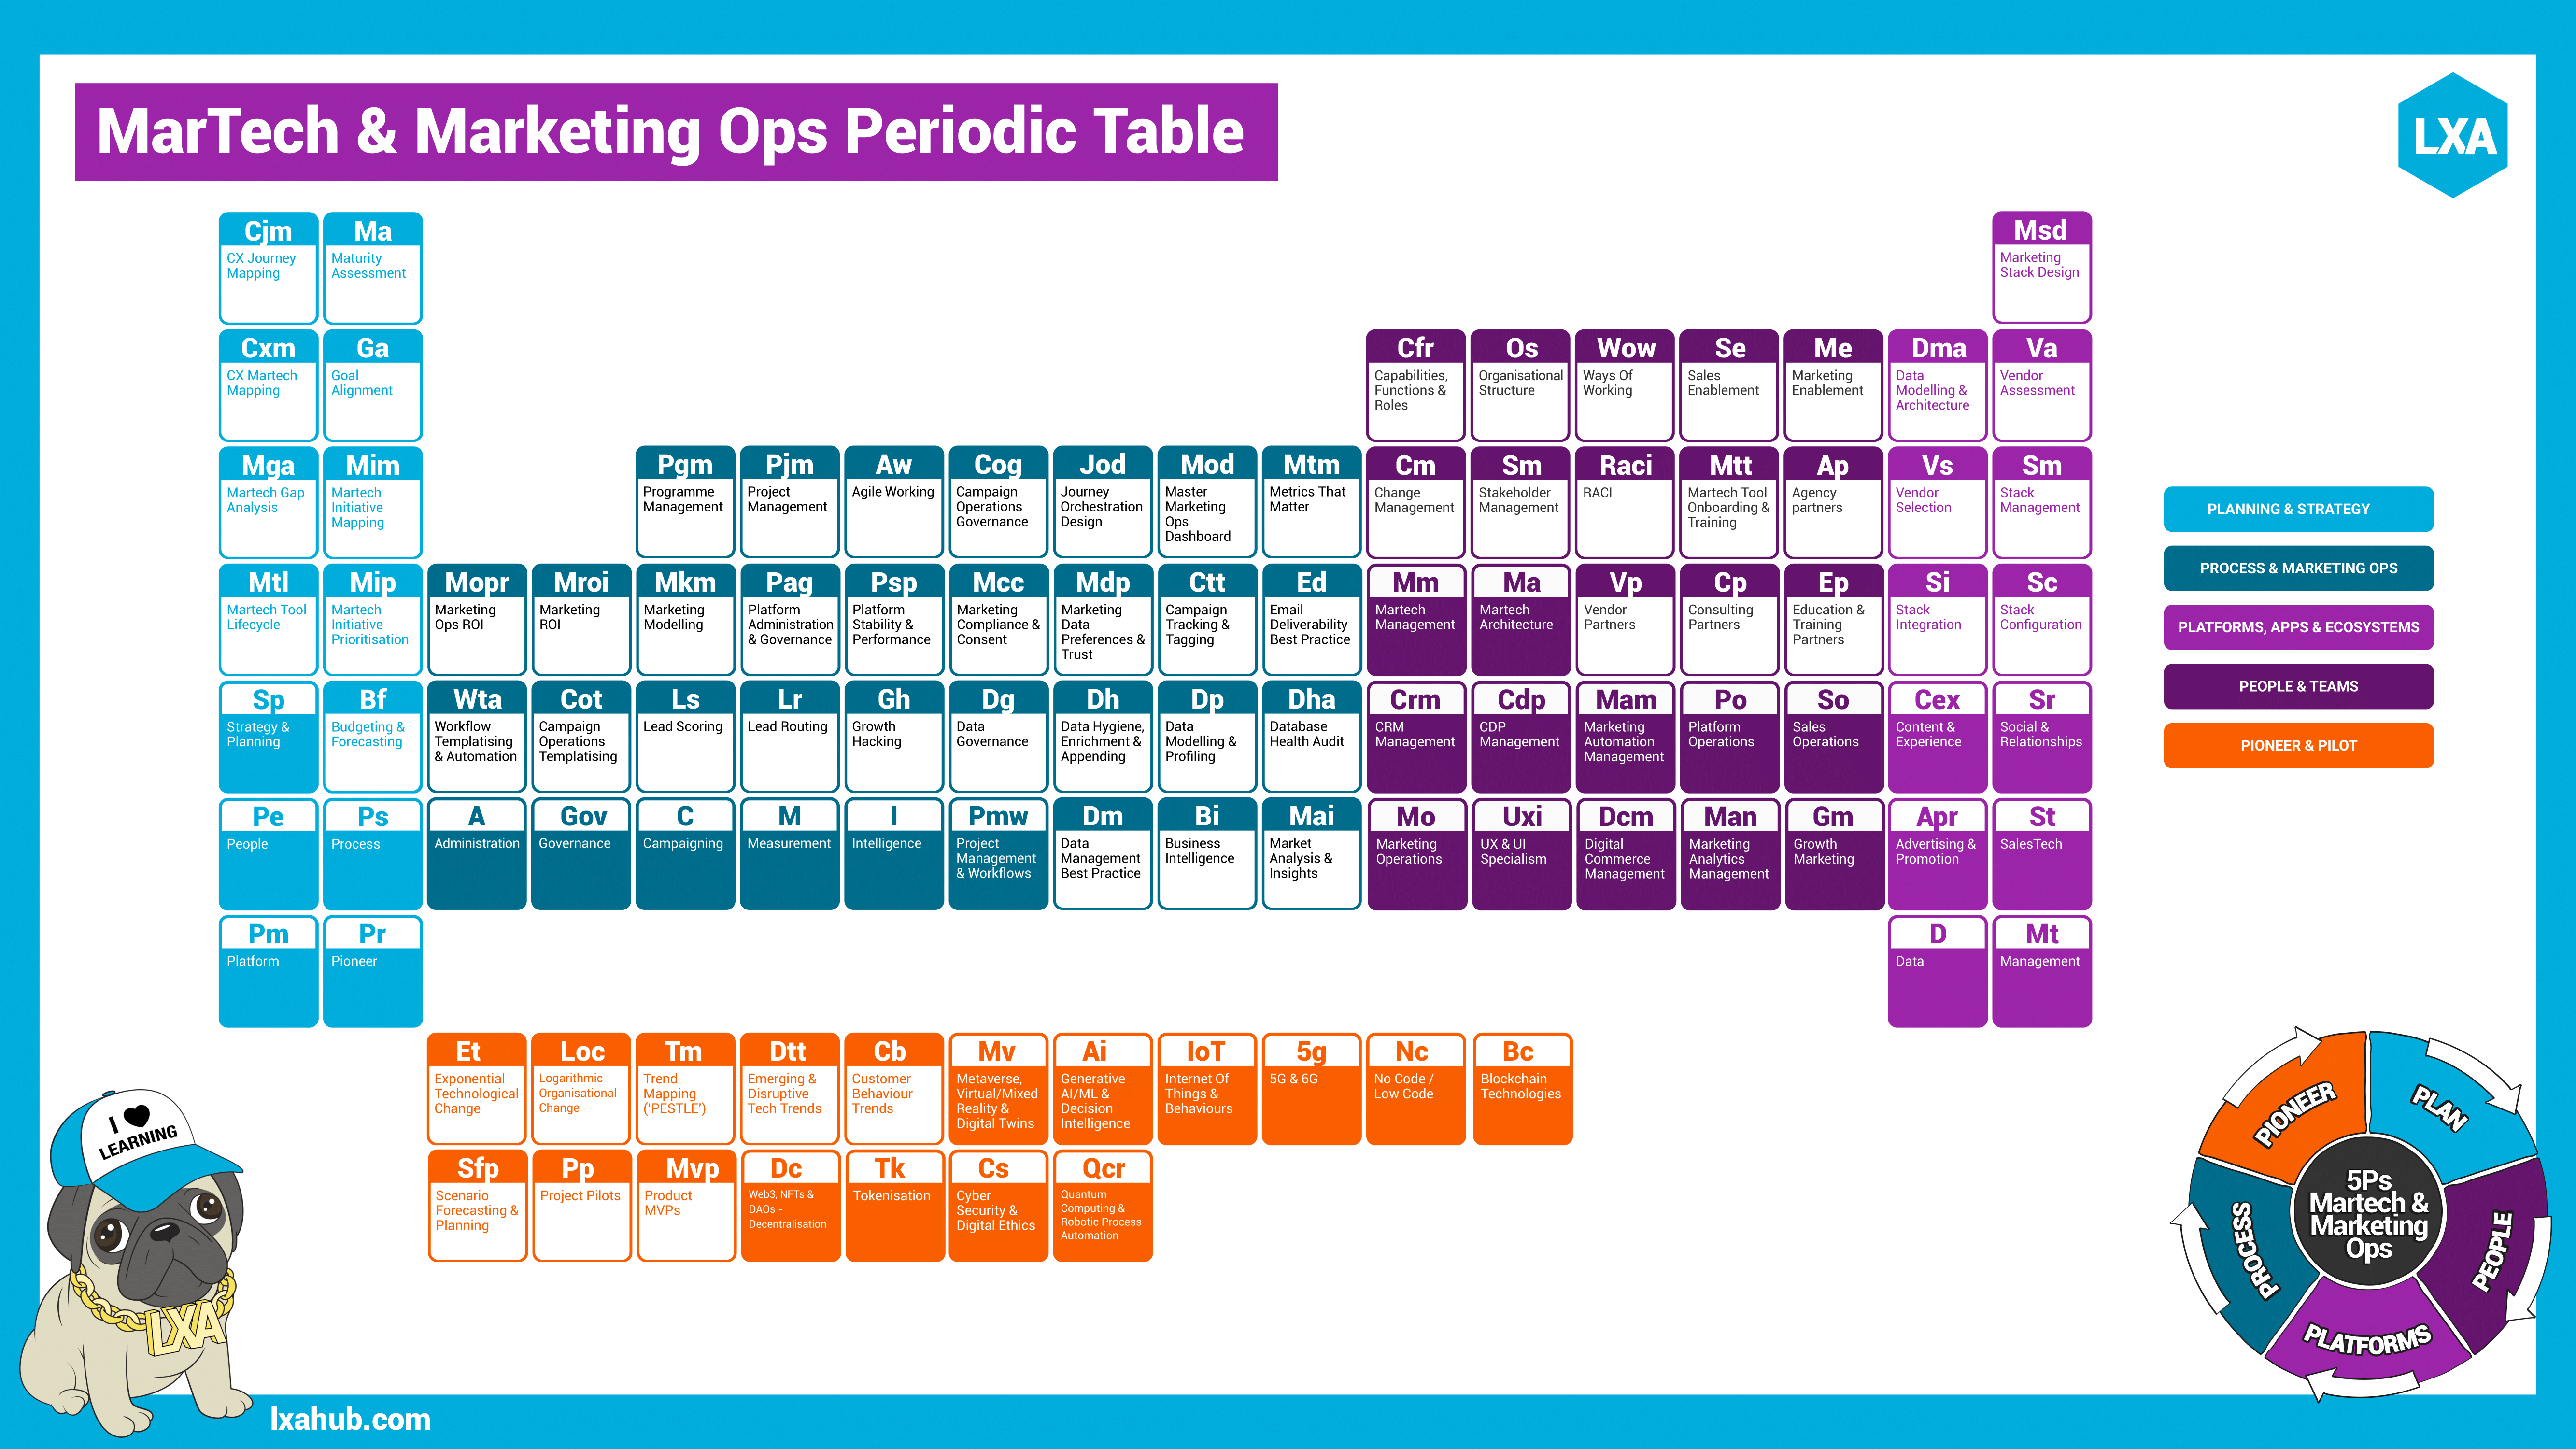 MarTech & Marketing Ops Periodic Table